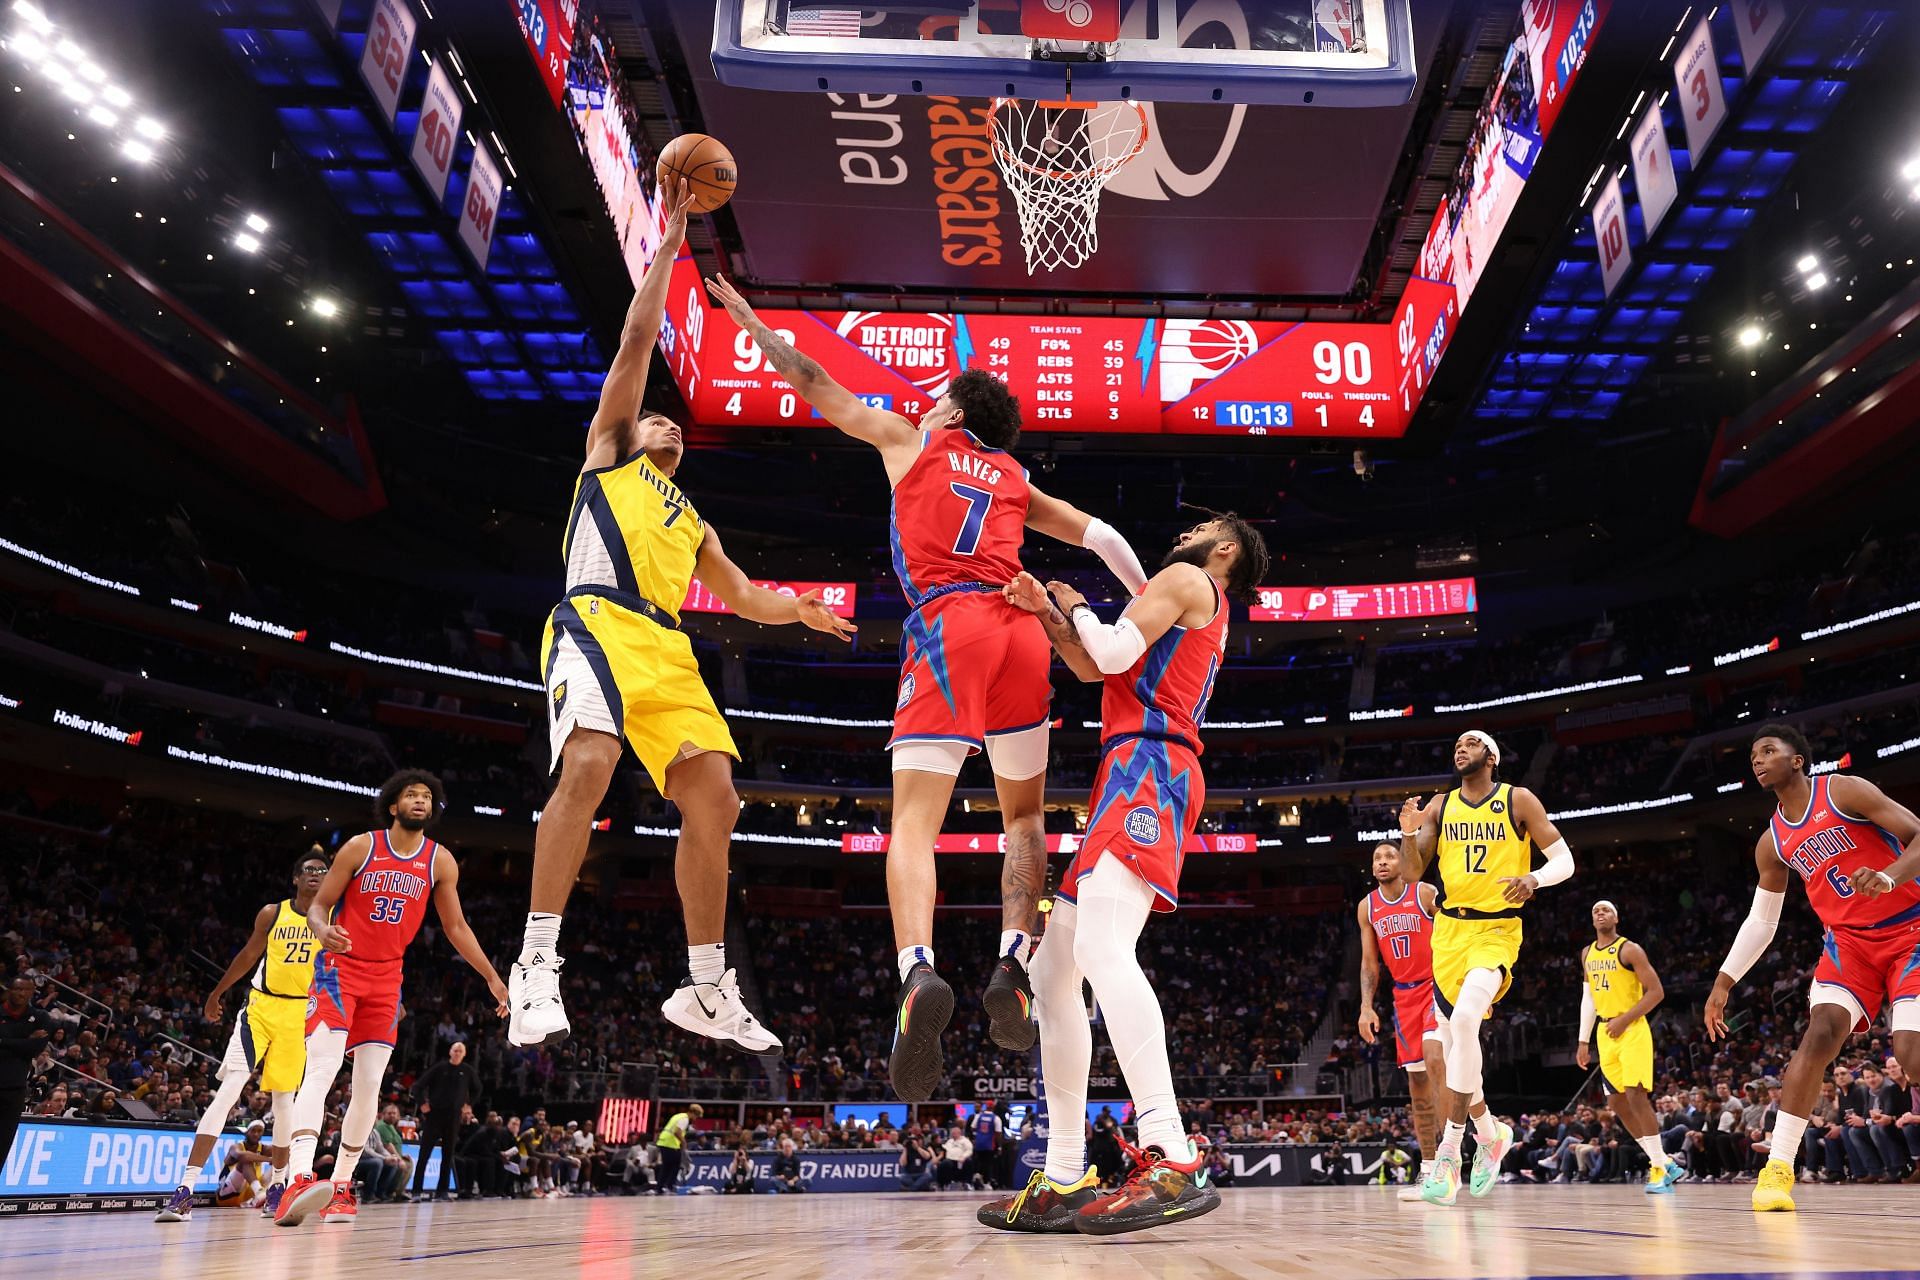 Detroit Pistons vs Indiana Pacers Odds, Line, Picks and Prediction